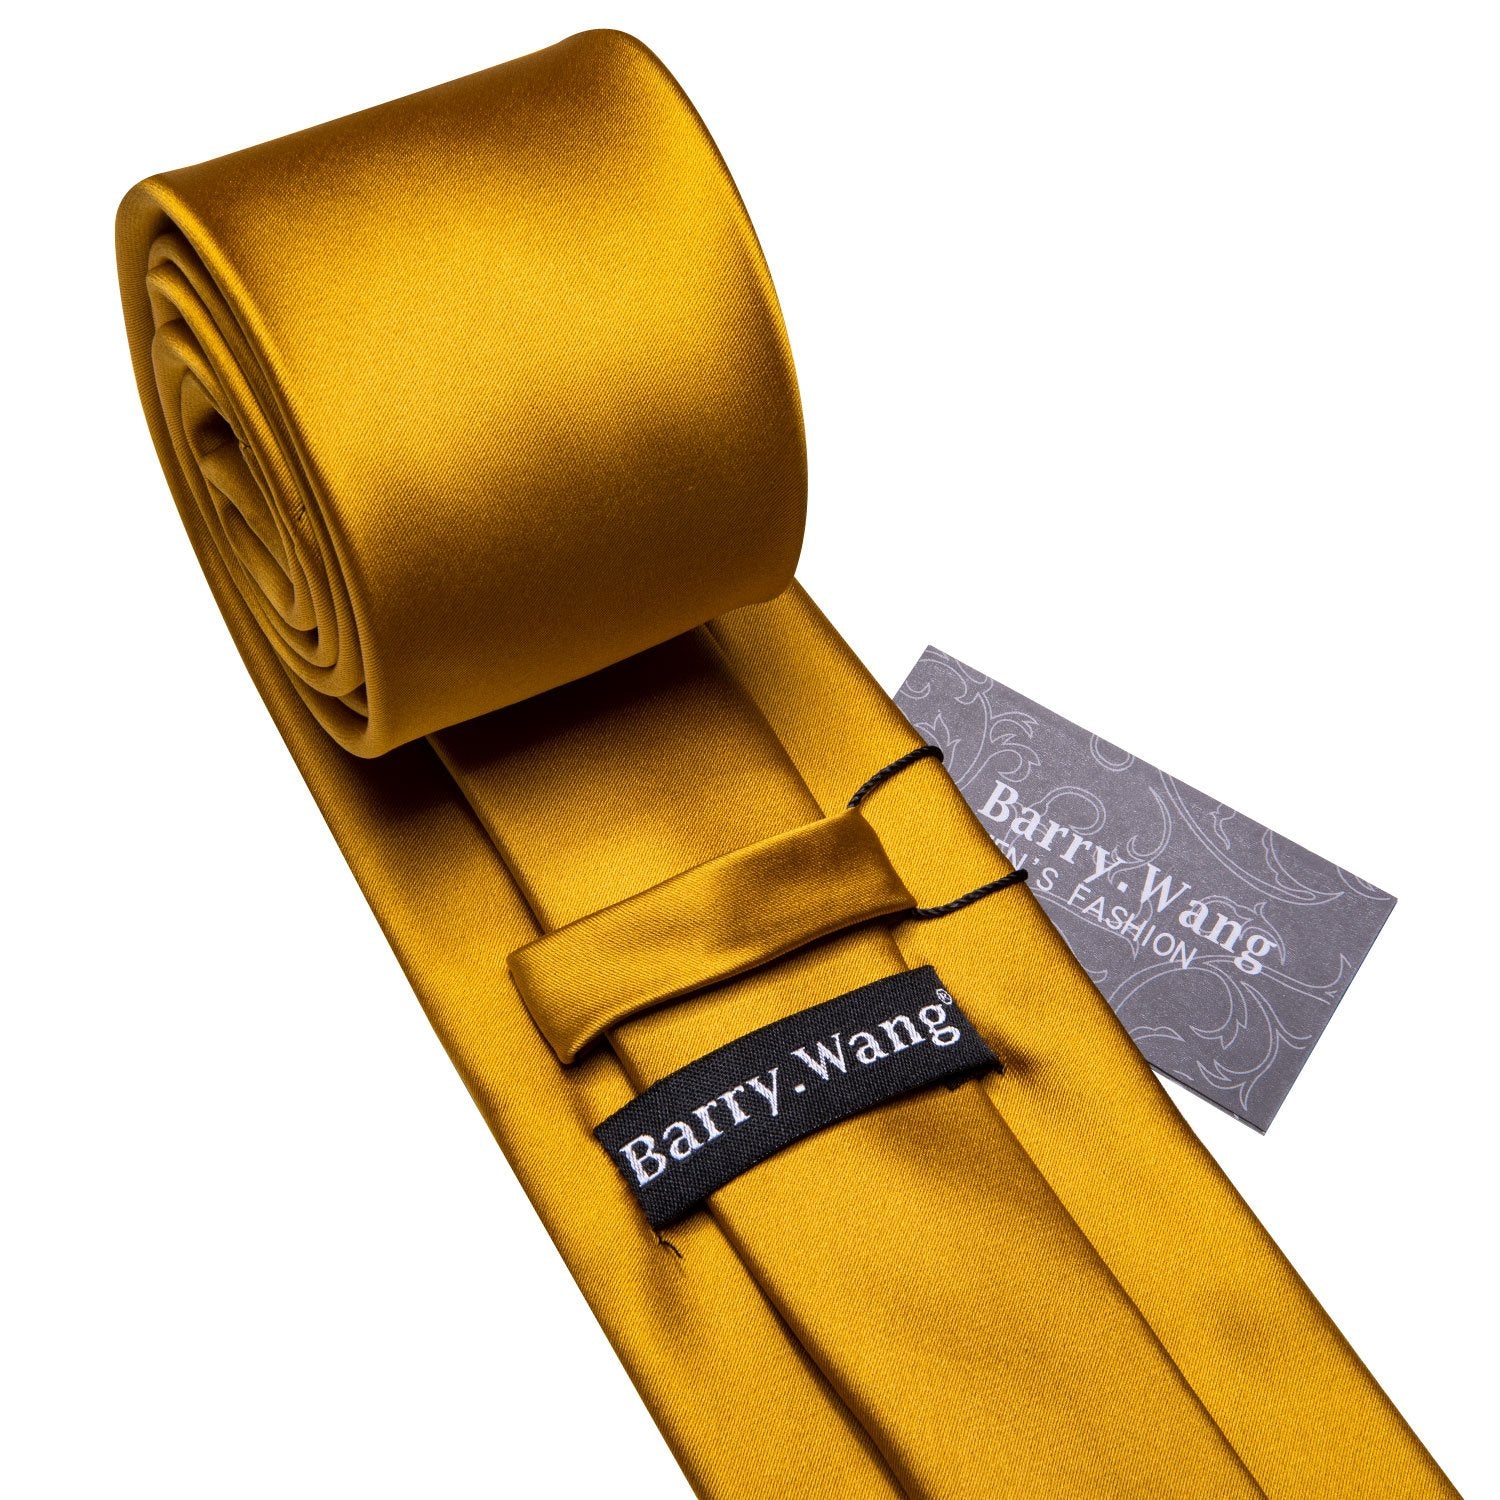 Barry.wang Golden Tie Solid Silk Tie Pocket Square Cufflinks Set with Brooches